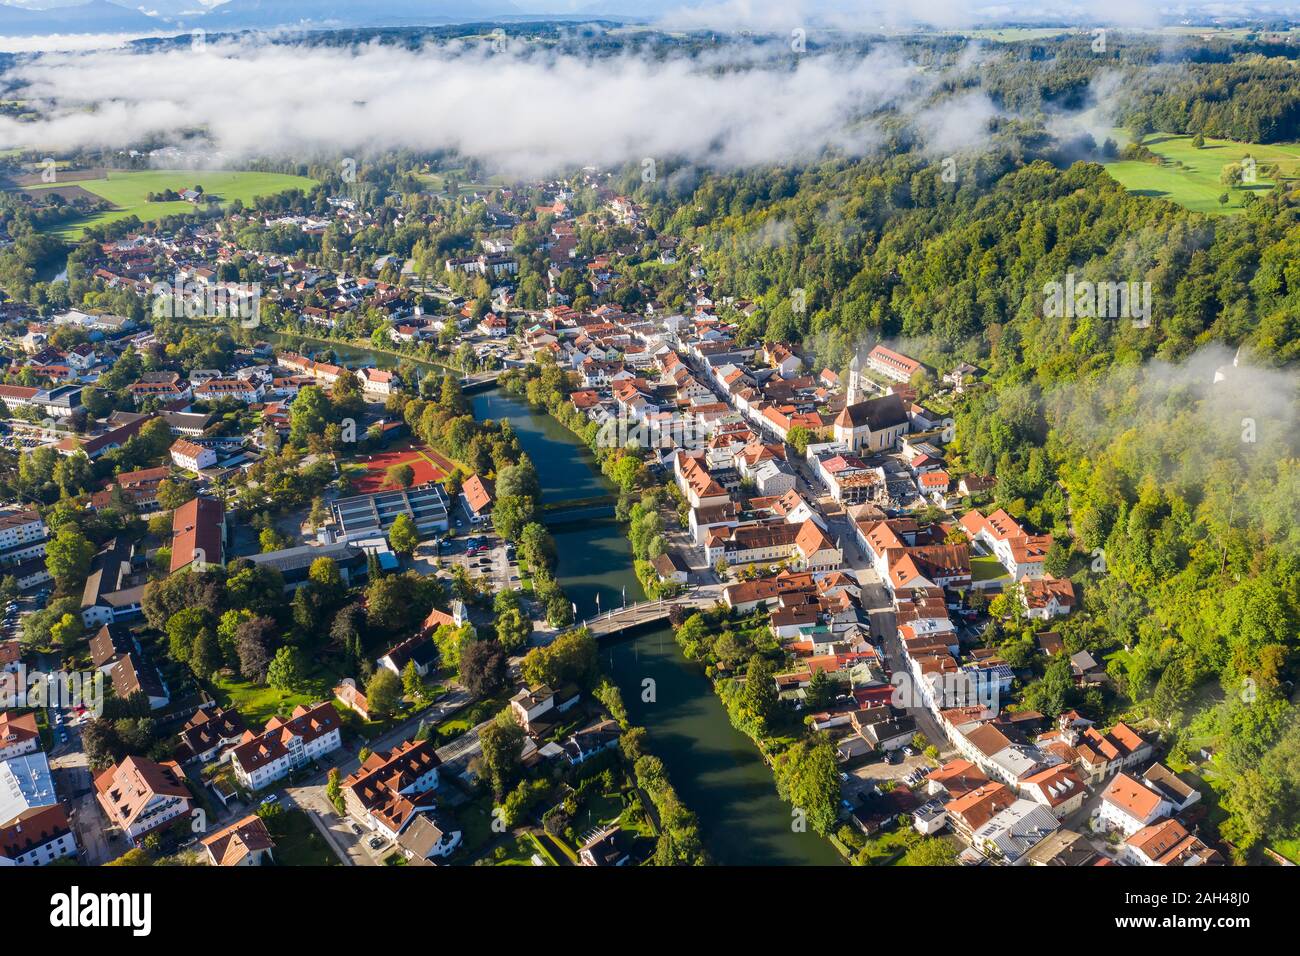 Germany, Bavaria, Wolfratshausen, Aerial view of countryside town along Loisach river Stock Photo